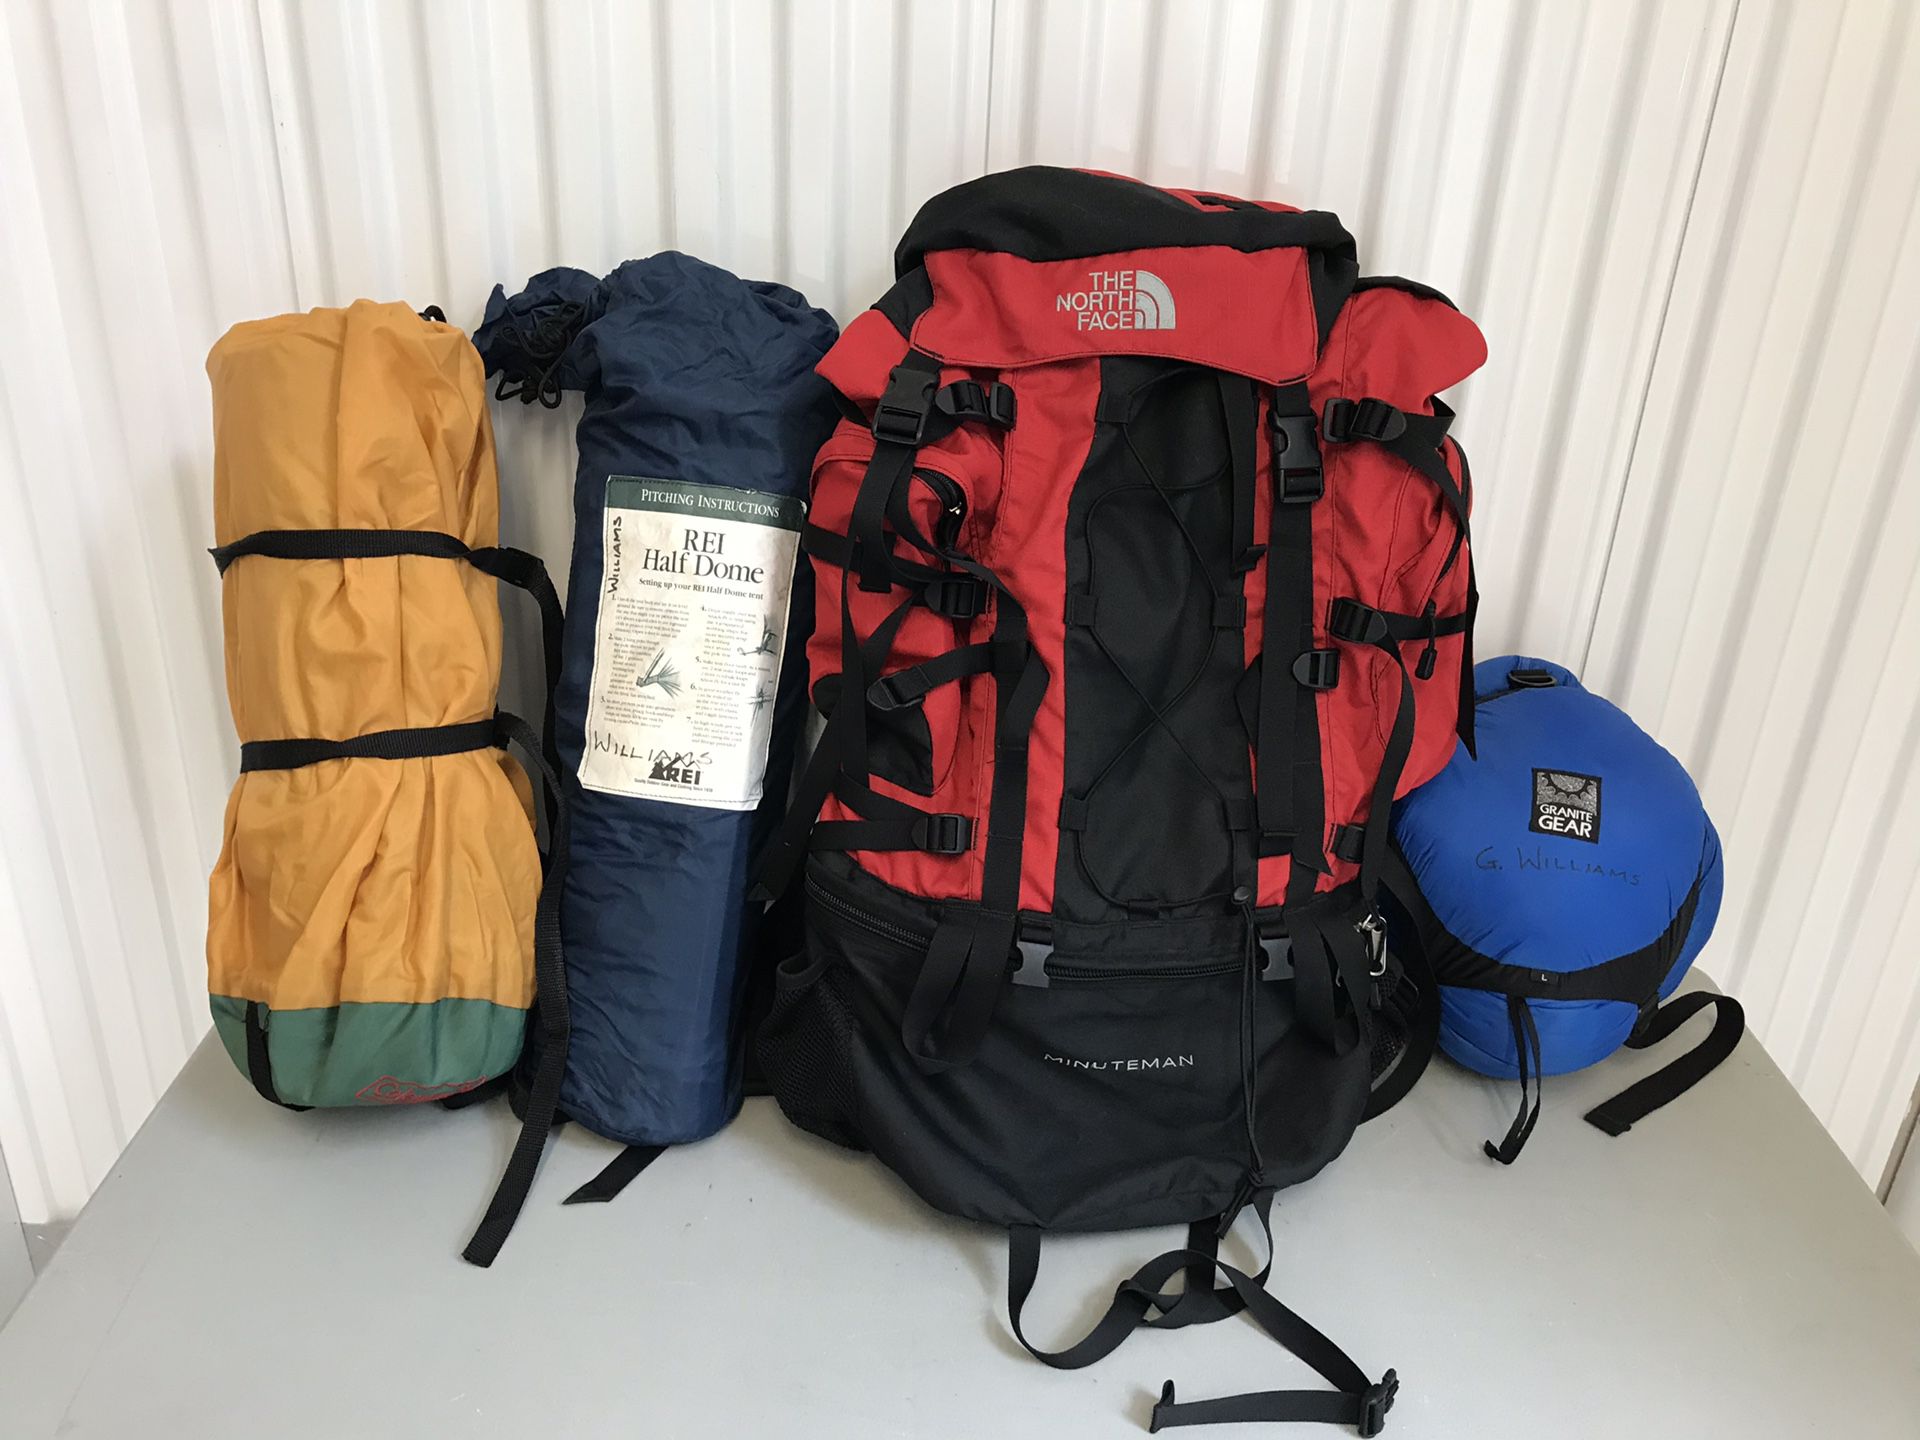 North Face Badlands Internal Frame Backpack Red Hiking Camping (M) And Tent, Etc